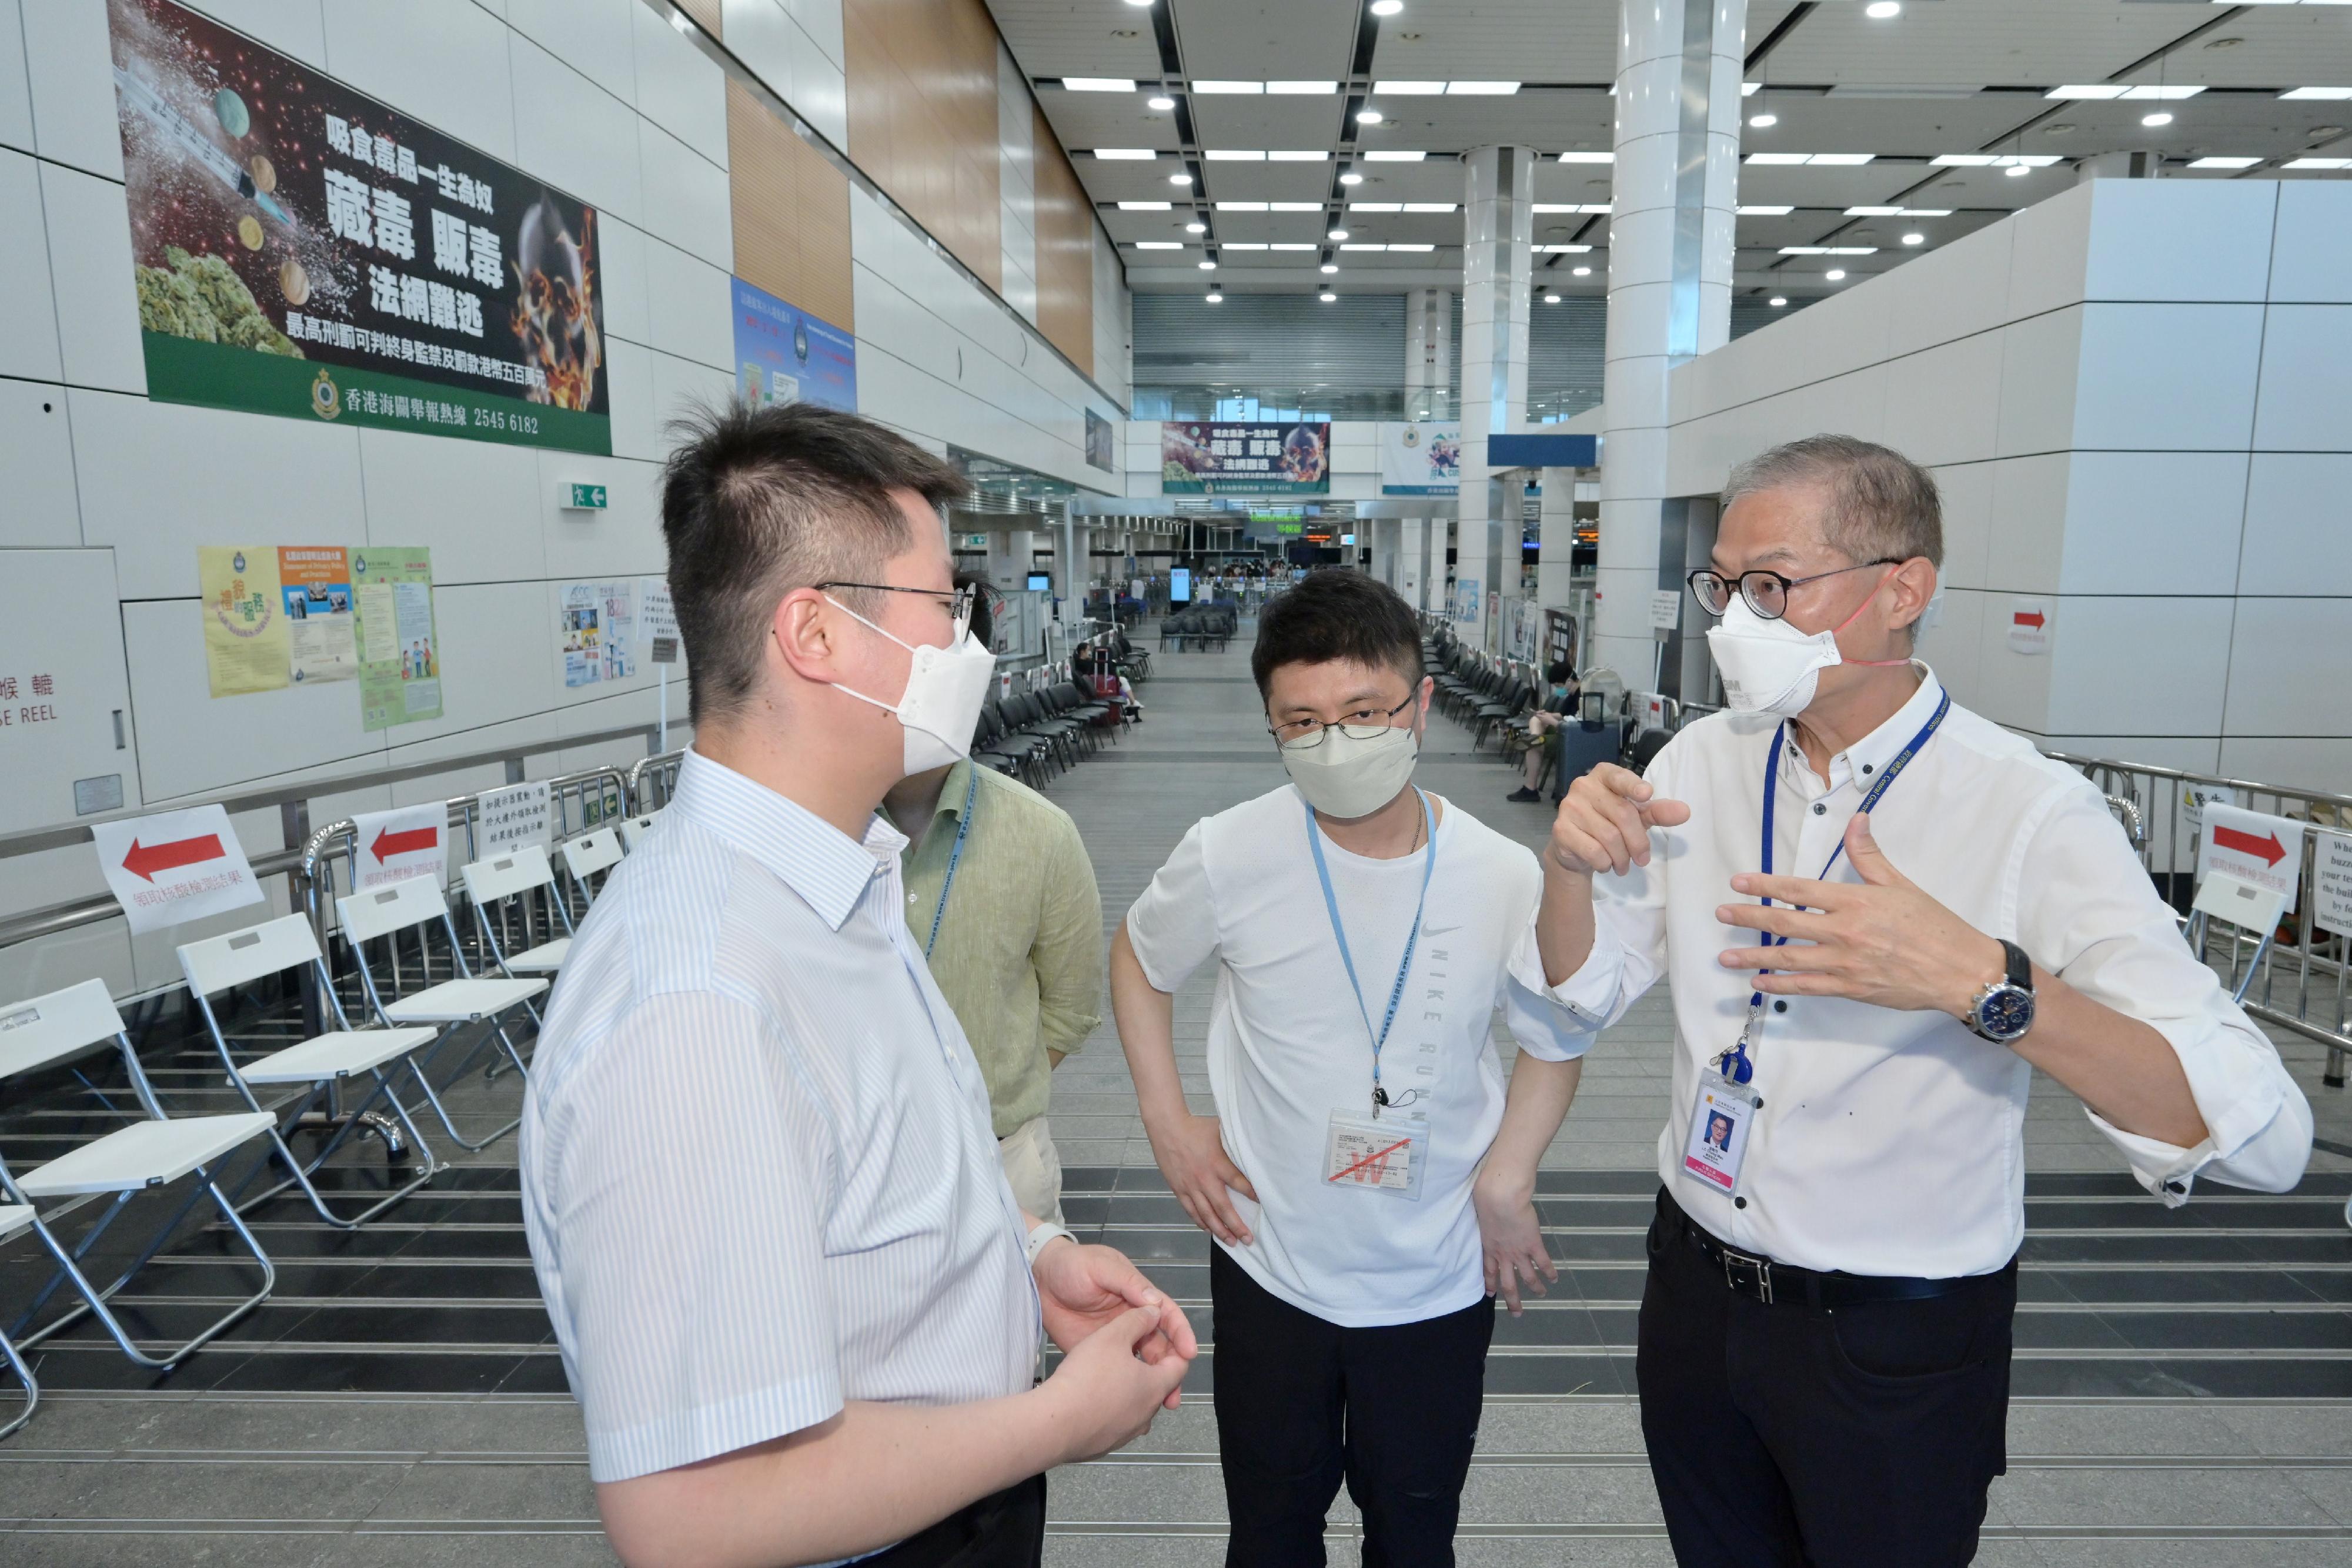 The Secretary for Health, Professor Lo Chung-mau (first right), accompanied by the Chief Port Health Officer of the Centre for Health Protection of the Department of Health, Dr Leung Yiu-hong (second right), inspects the workflow for special nucleic acid testing before departure at the Shenzhen Bay Control Point today (July 10). He also requested the testing operator representative (first left) to keep on enhancing the testing capacity for rapid nucleic acid test to meet the public need.